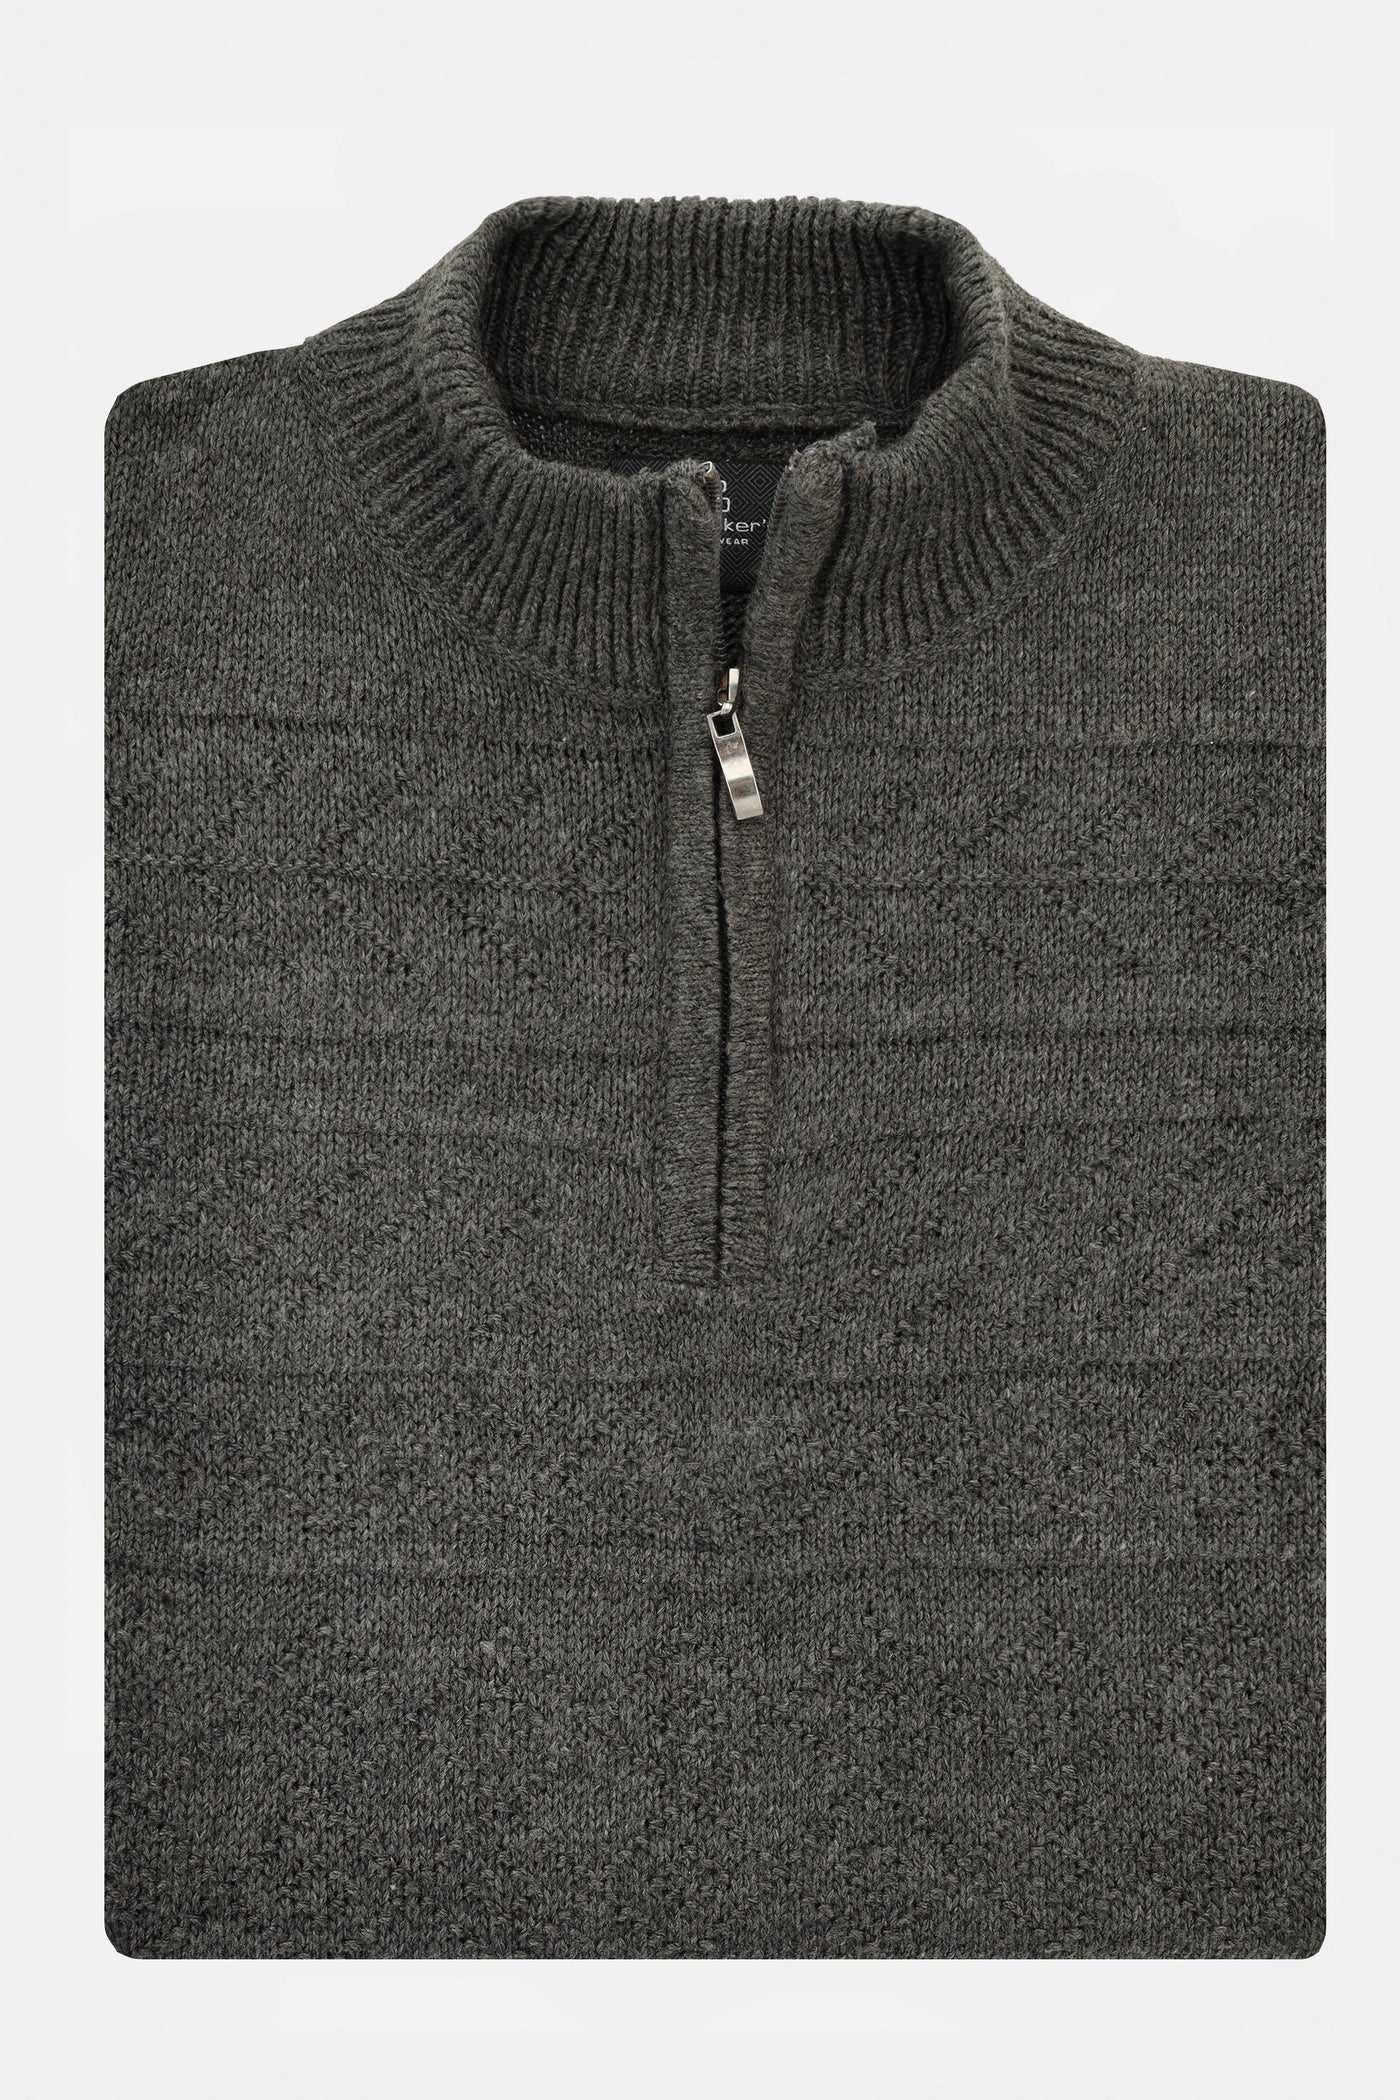 Jacquard Knitted Quarter Zip Gray Pullover